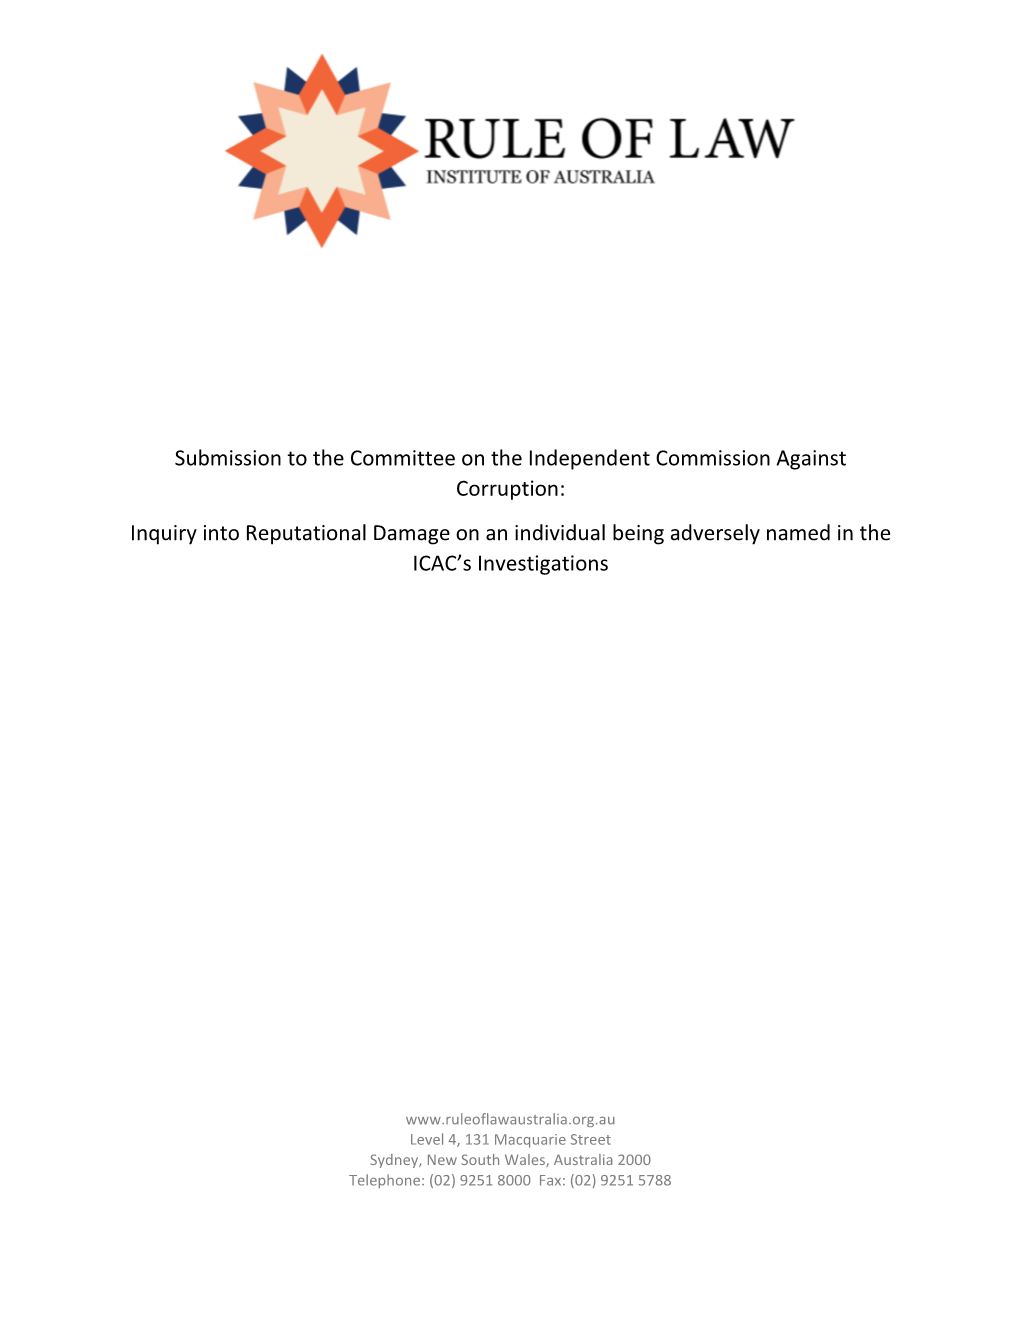 Submission to the Committee on the Independent Commission Against Corruption: Inquiry Into Reputational Damage on an Individual